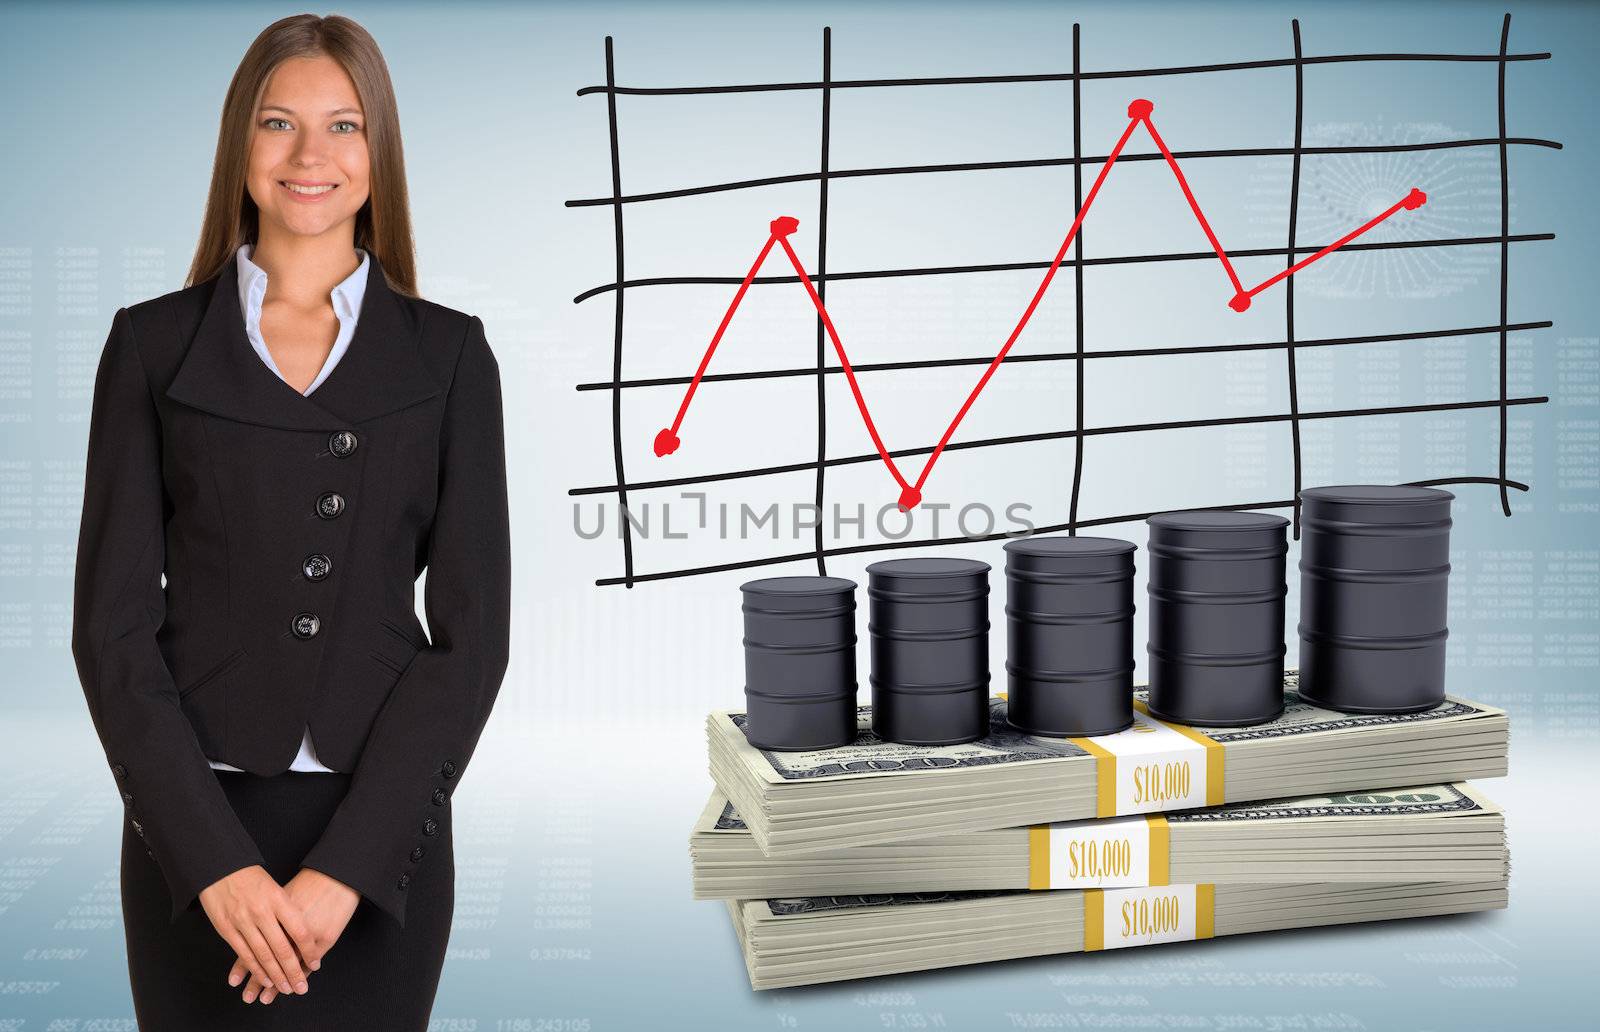 Businesswoman with barrels oil and money. Schedule of price increases in background